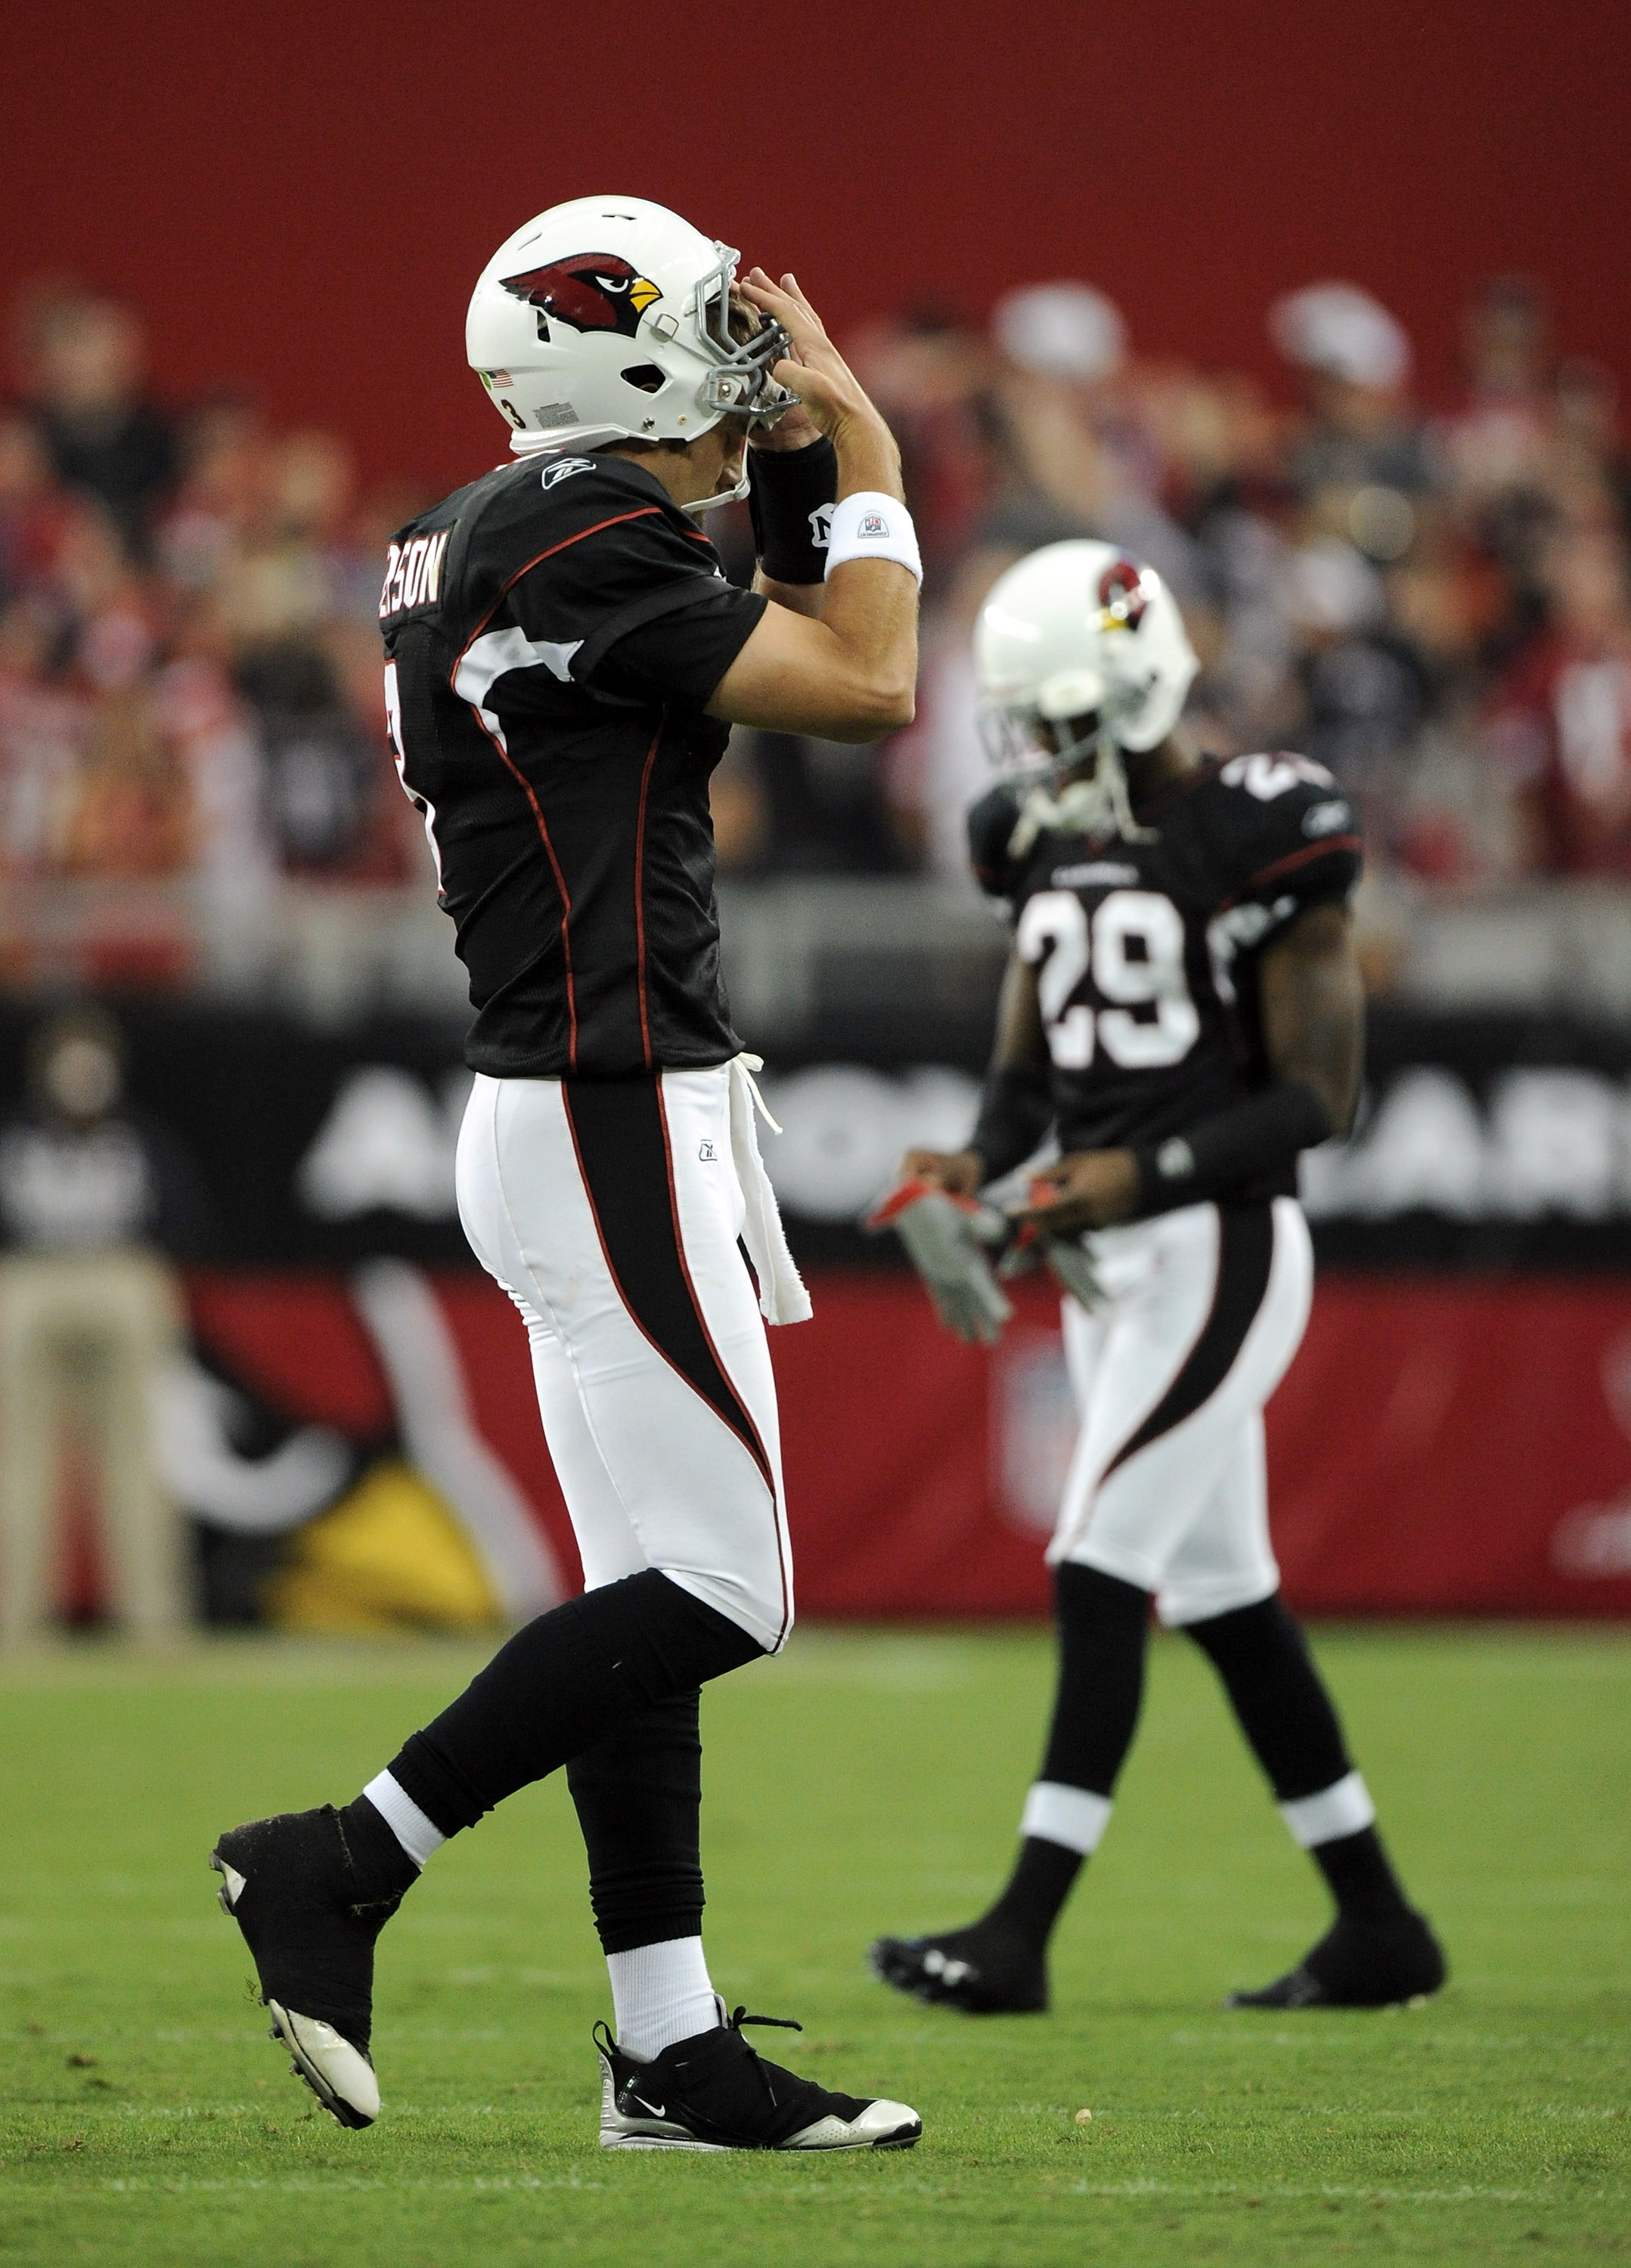 GLENDALE, AZ - OCTOBER 31:  Derek Anderson #3 of the Arizona Cardinals reacts as he leaves the field after throwing an interception toAqib Talib #25 of the Tampa Bay Buccaneers during the fourth quarter at University of Phoenix Stadium on October 31, 2010